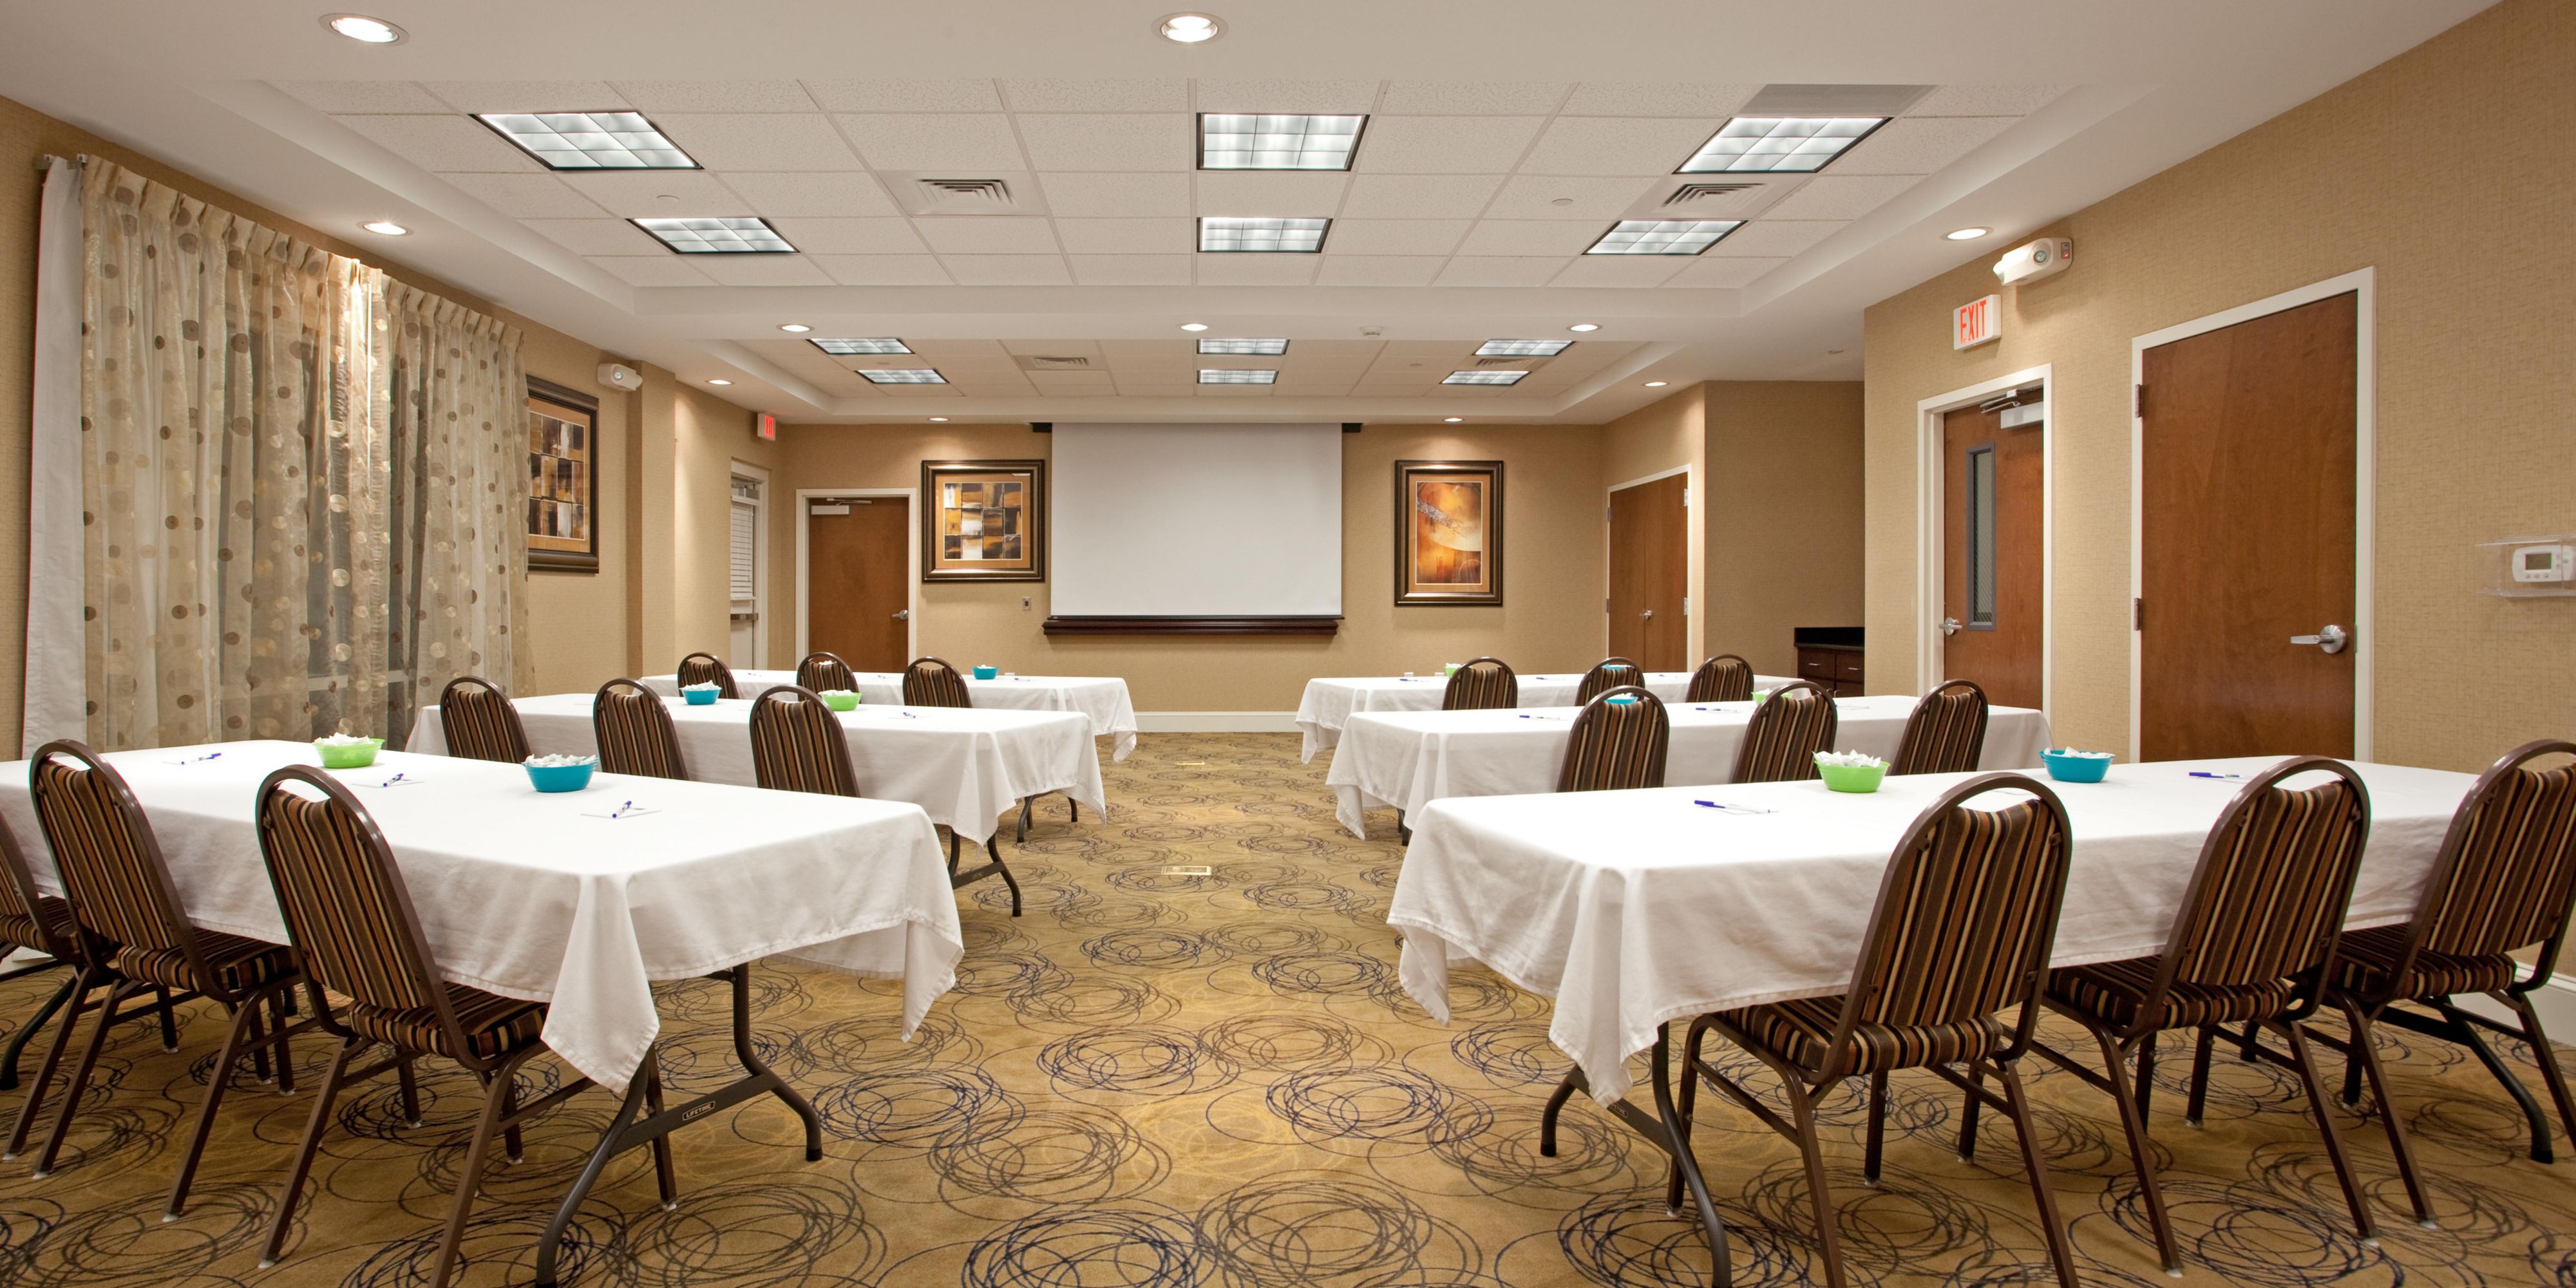 Our newly renovated hotel offers convenient meeting space for your next corporate gathering or social event.  800 square feet of space, accommodating up to 85 guests.  The number of guests will vary based on your set-up requirements.  Call us today and let us help you take the worry out of your next event.